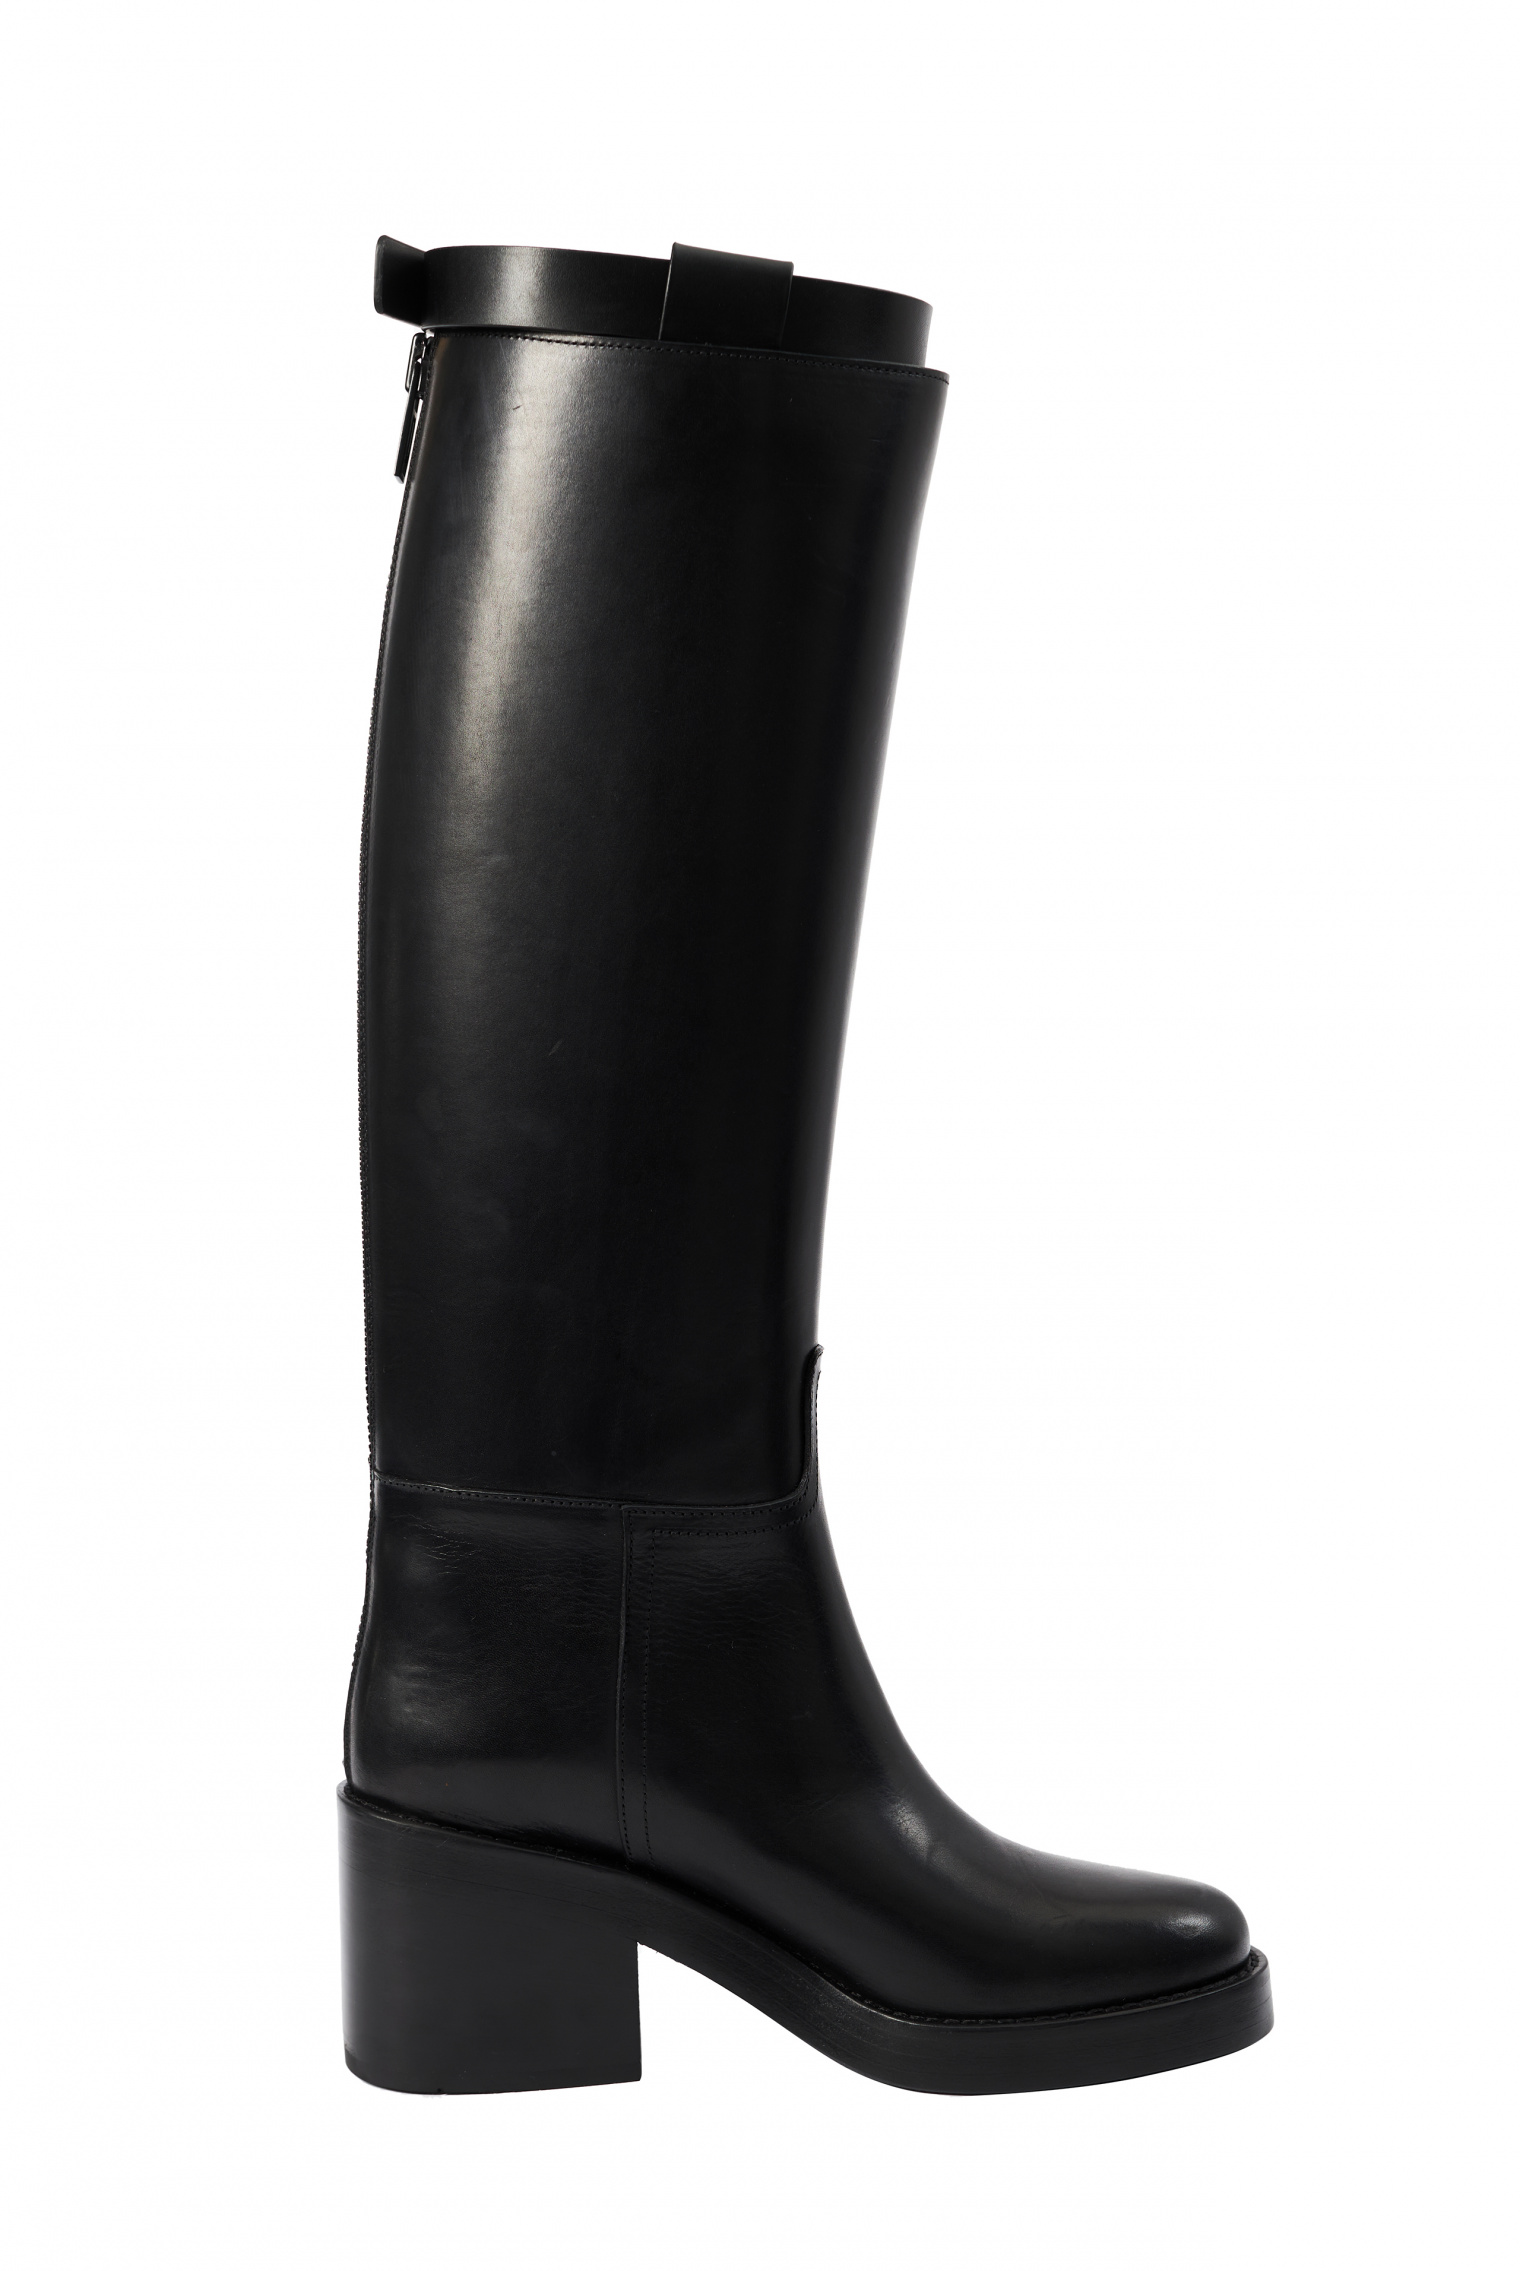 Ann Demeulemeester Black Riding boots with heel